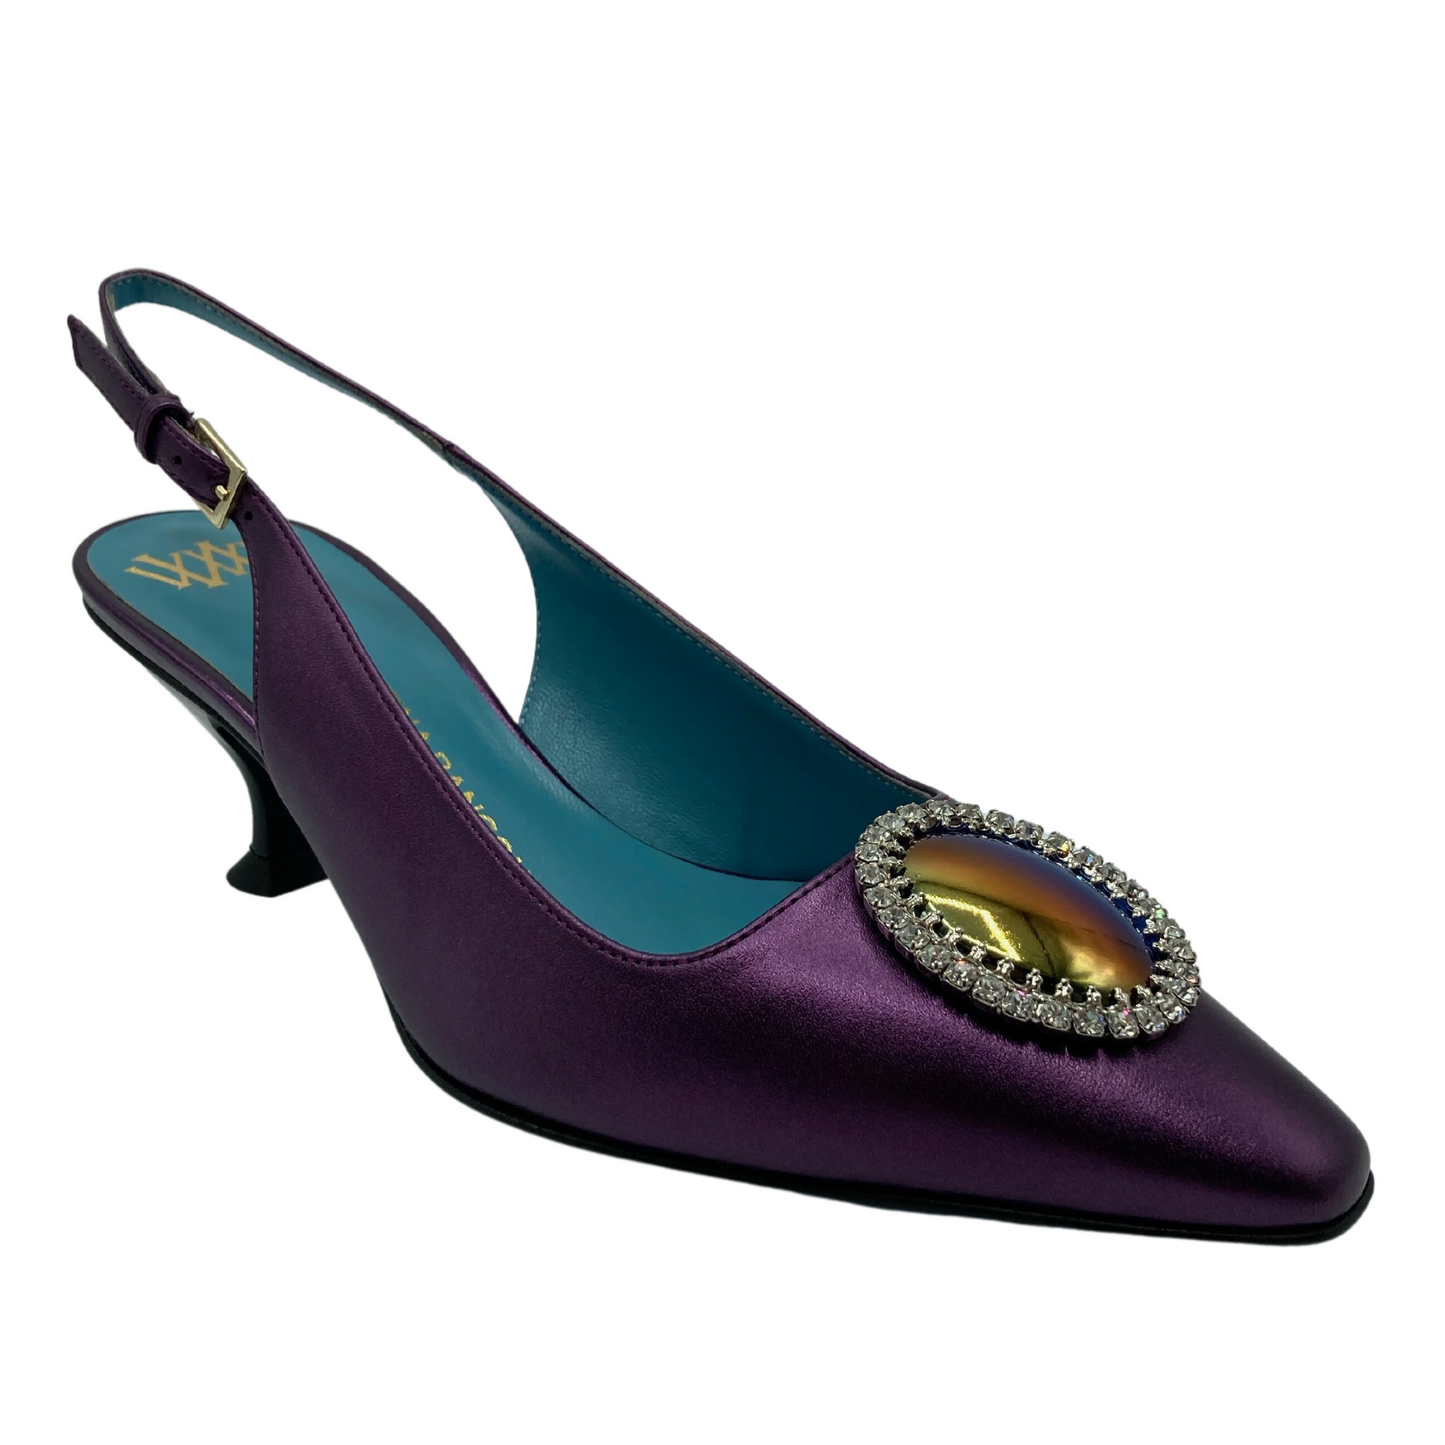 45 degree angled view of purple pointed toe, sling back pump with oval jewel detail on upper.